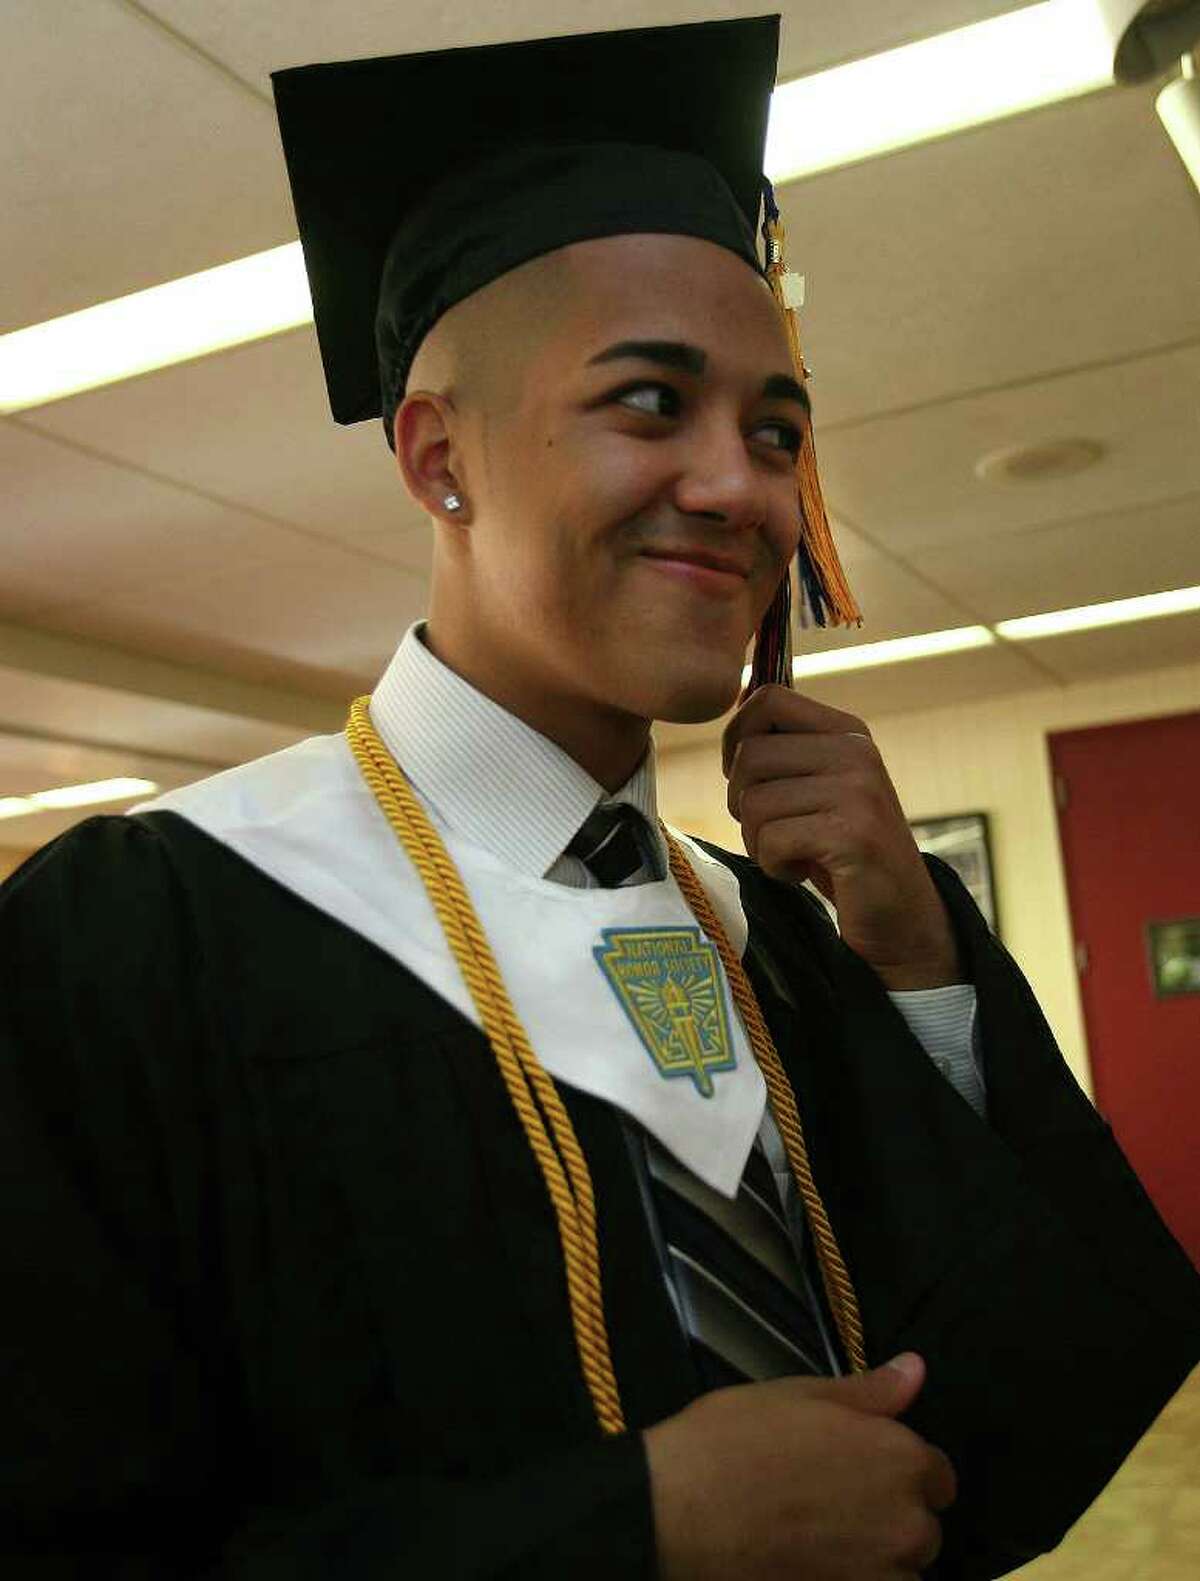 A.J. Planas of Bridgeport gets ready for his graduation at Platt Technical High School in Milford on Monday, June 20, 2011.